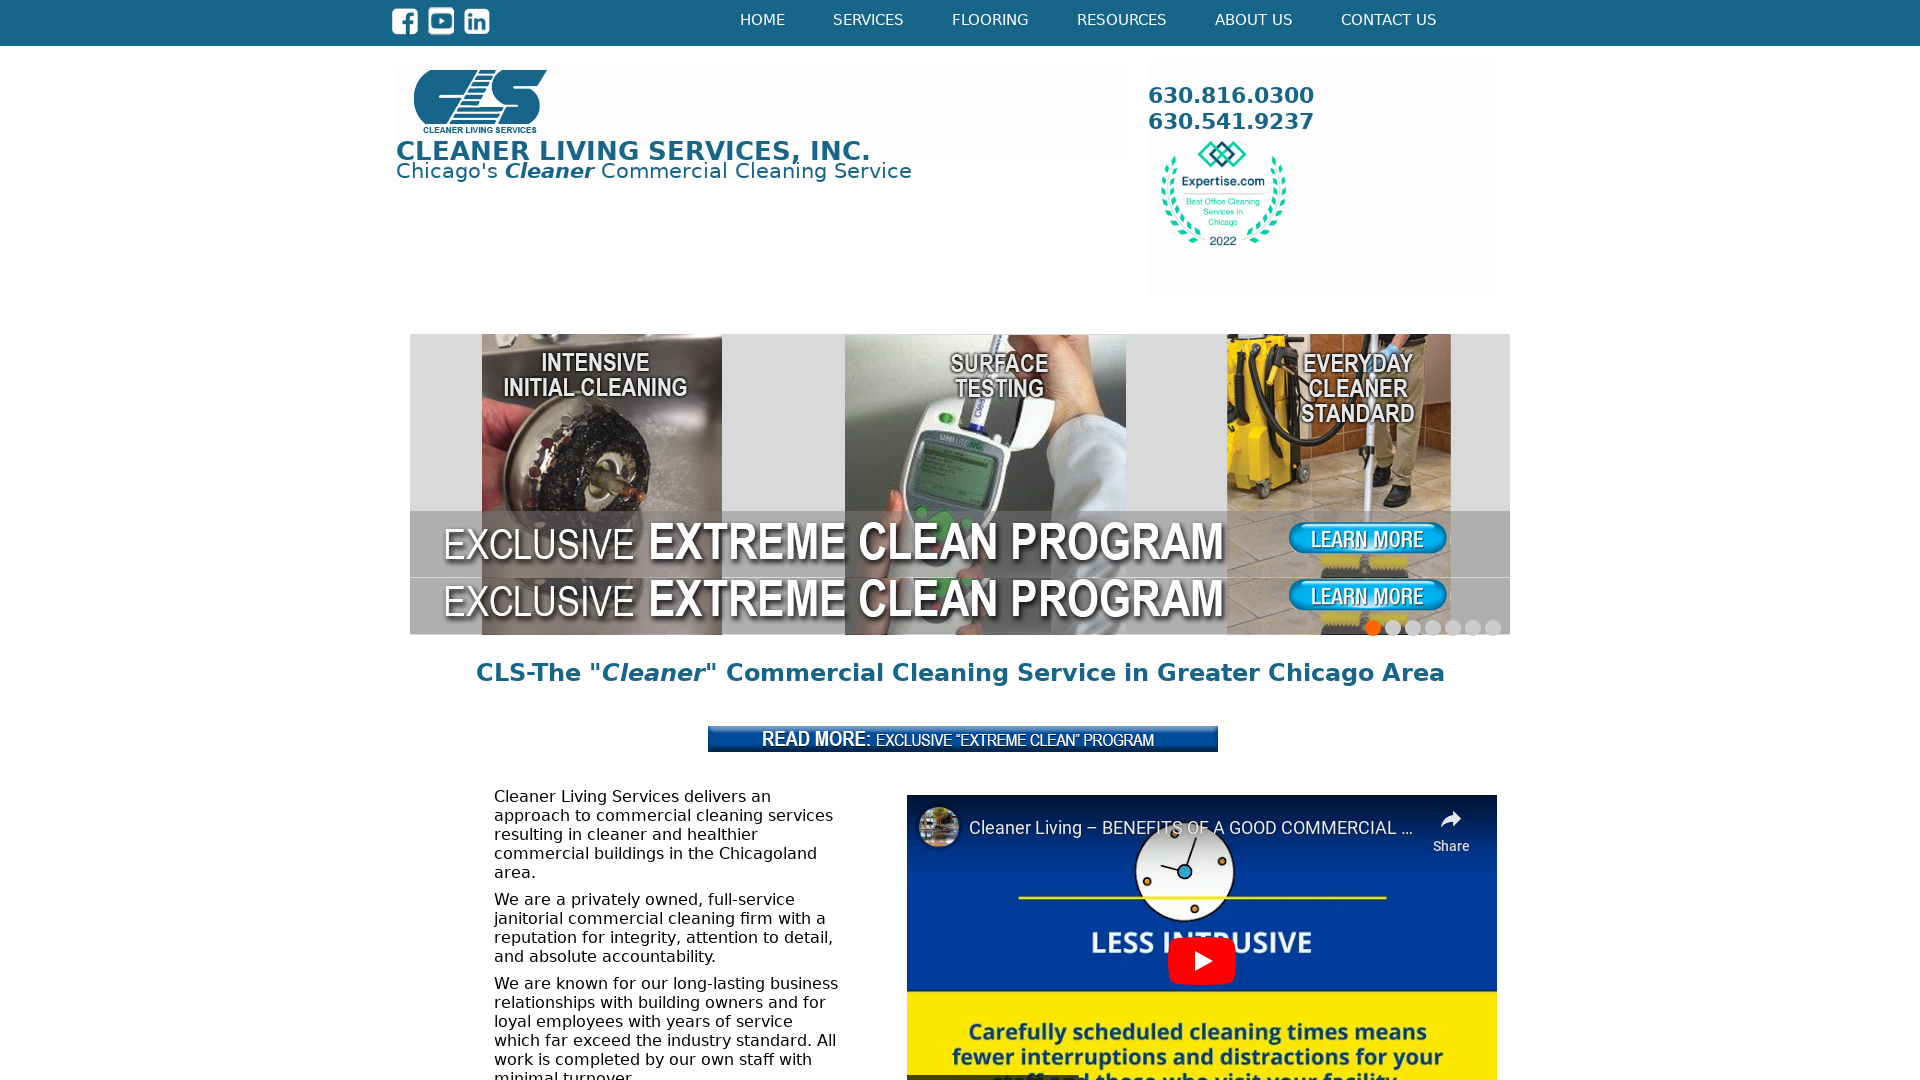 Cleaner Living Services